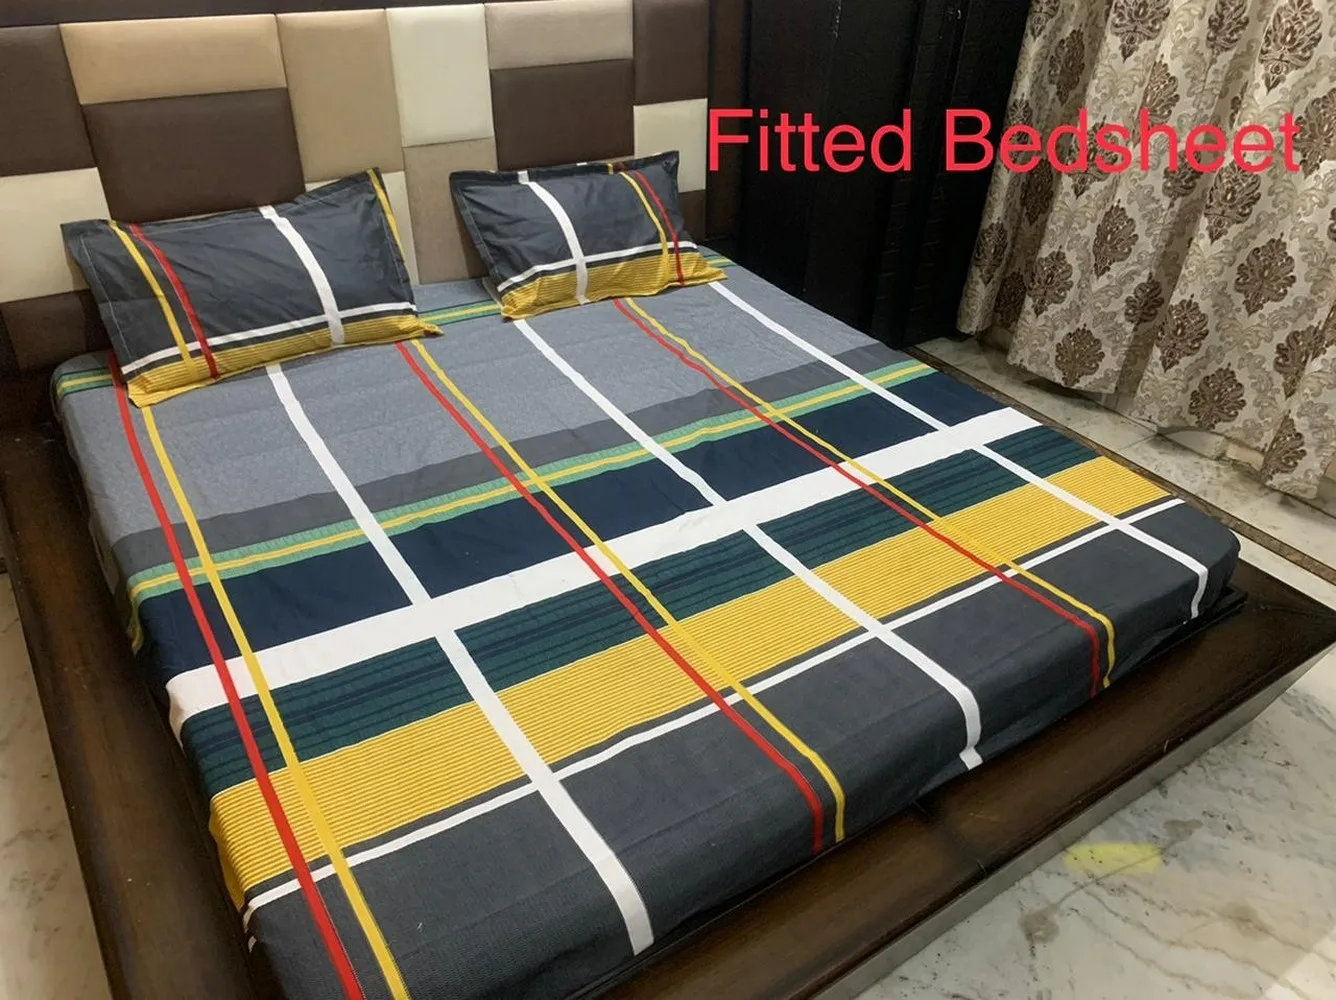 Bedsheet printed, Fitted, Elastic Corner, 90x100, Glace Cotton, 2 Pillow Covers, grey, box lines design